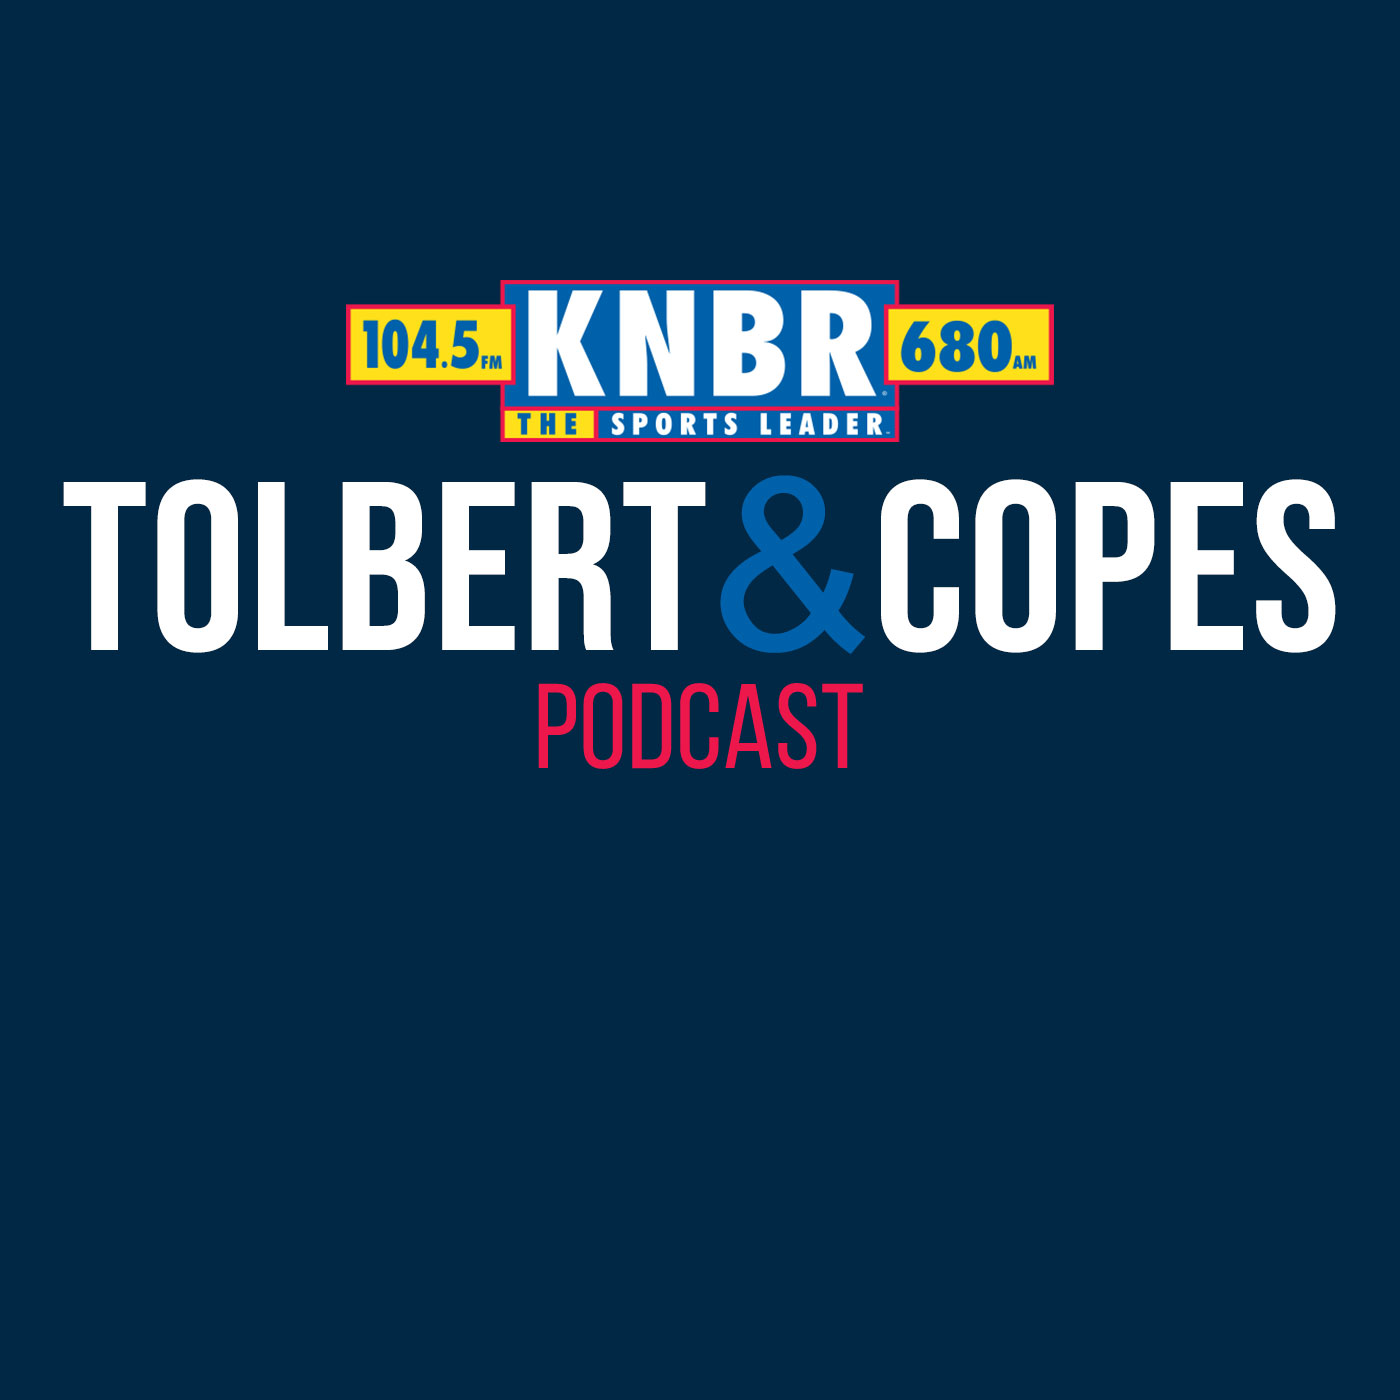 6-24 Jim Petersen joins Tolbert & Copes to discuss Andrew Wiggins transformation from Timberwolves to Warriors